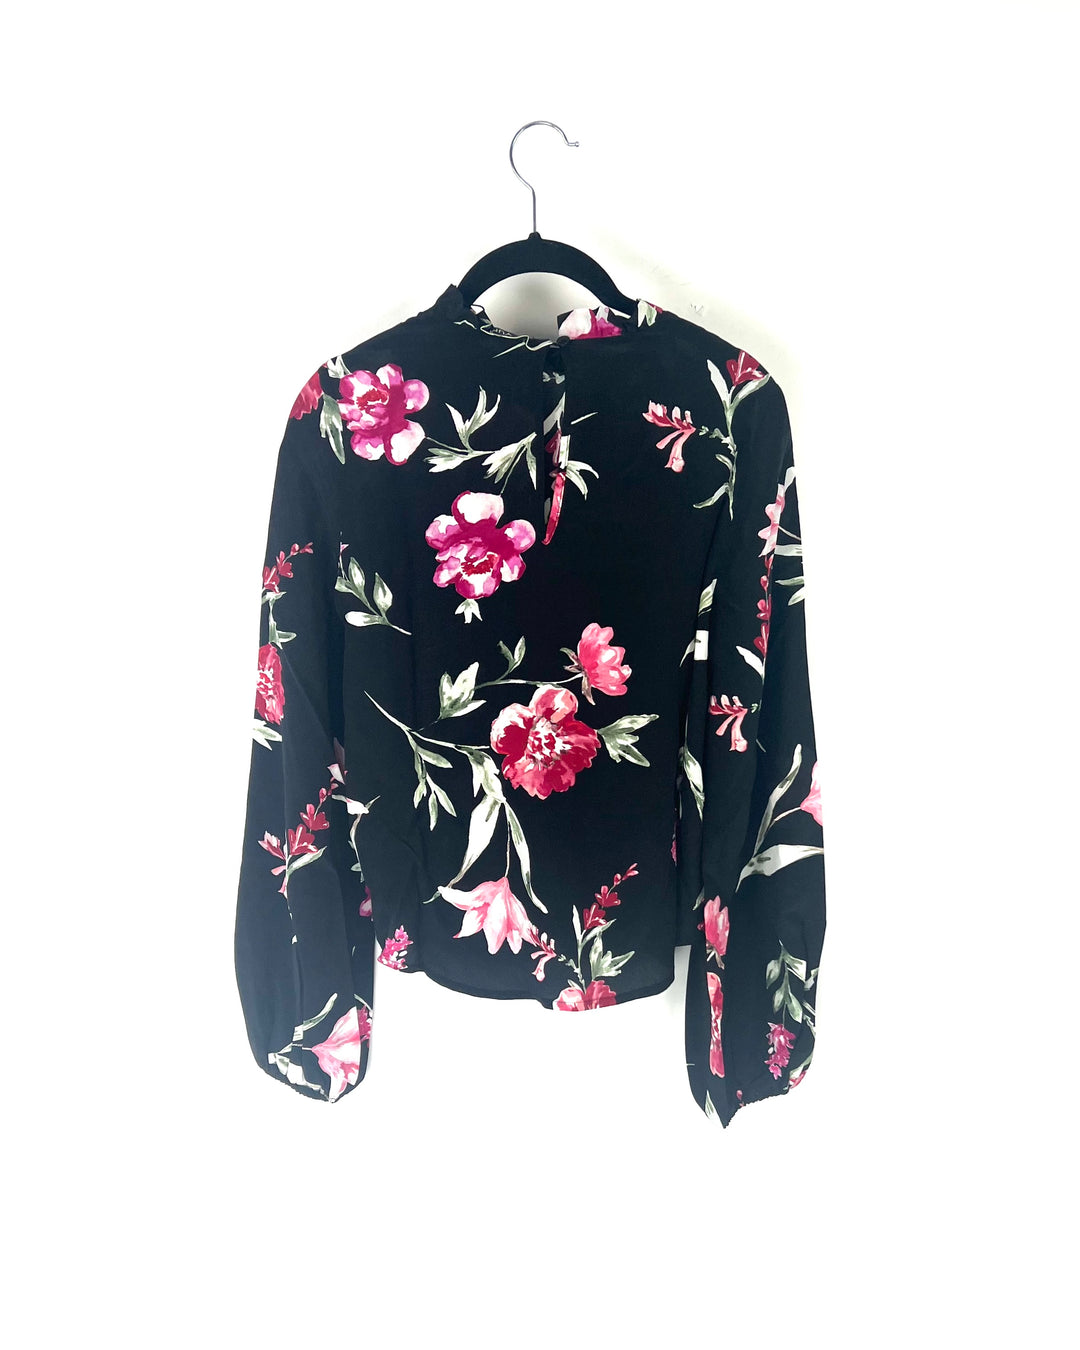 Black Floral Long Sleeve Blouse - Extra Extra Small and Small